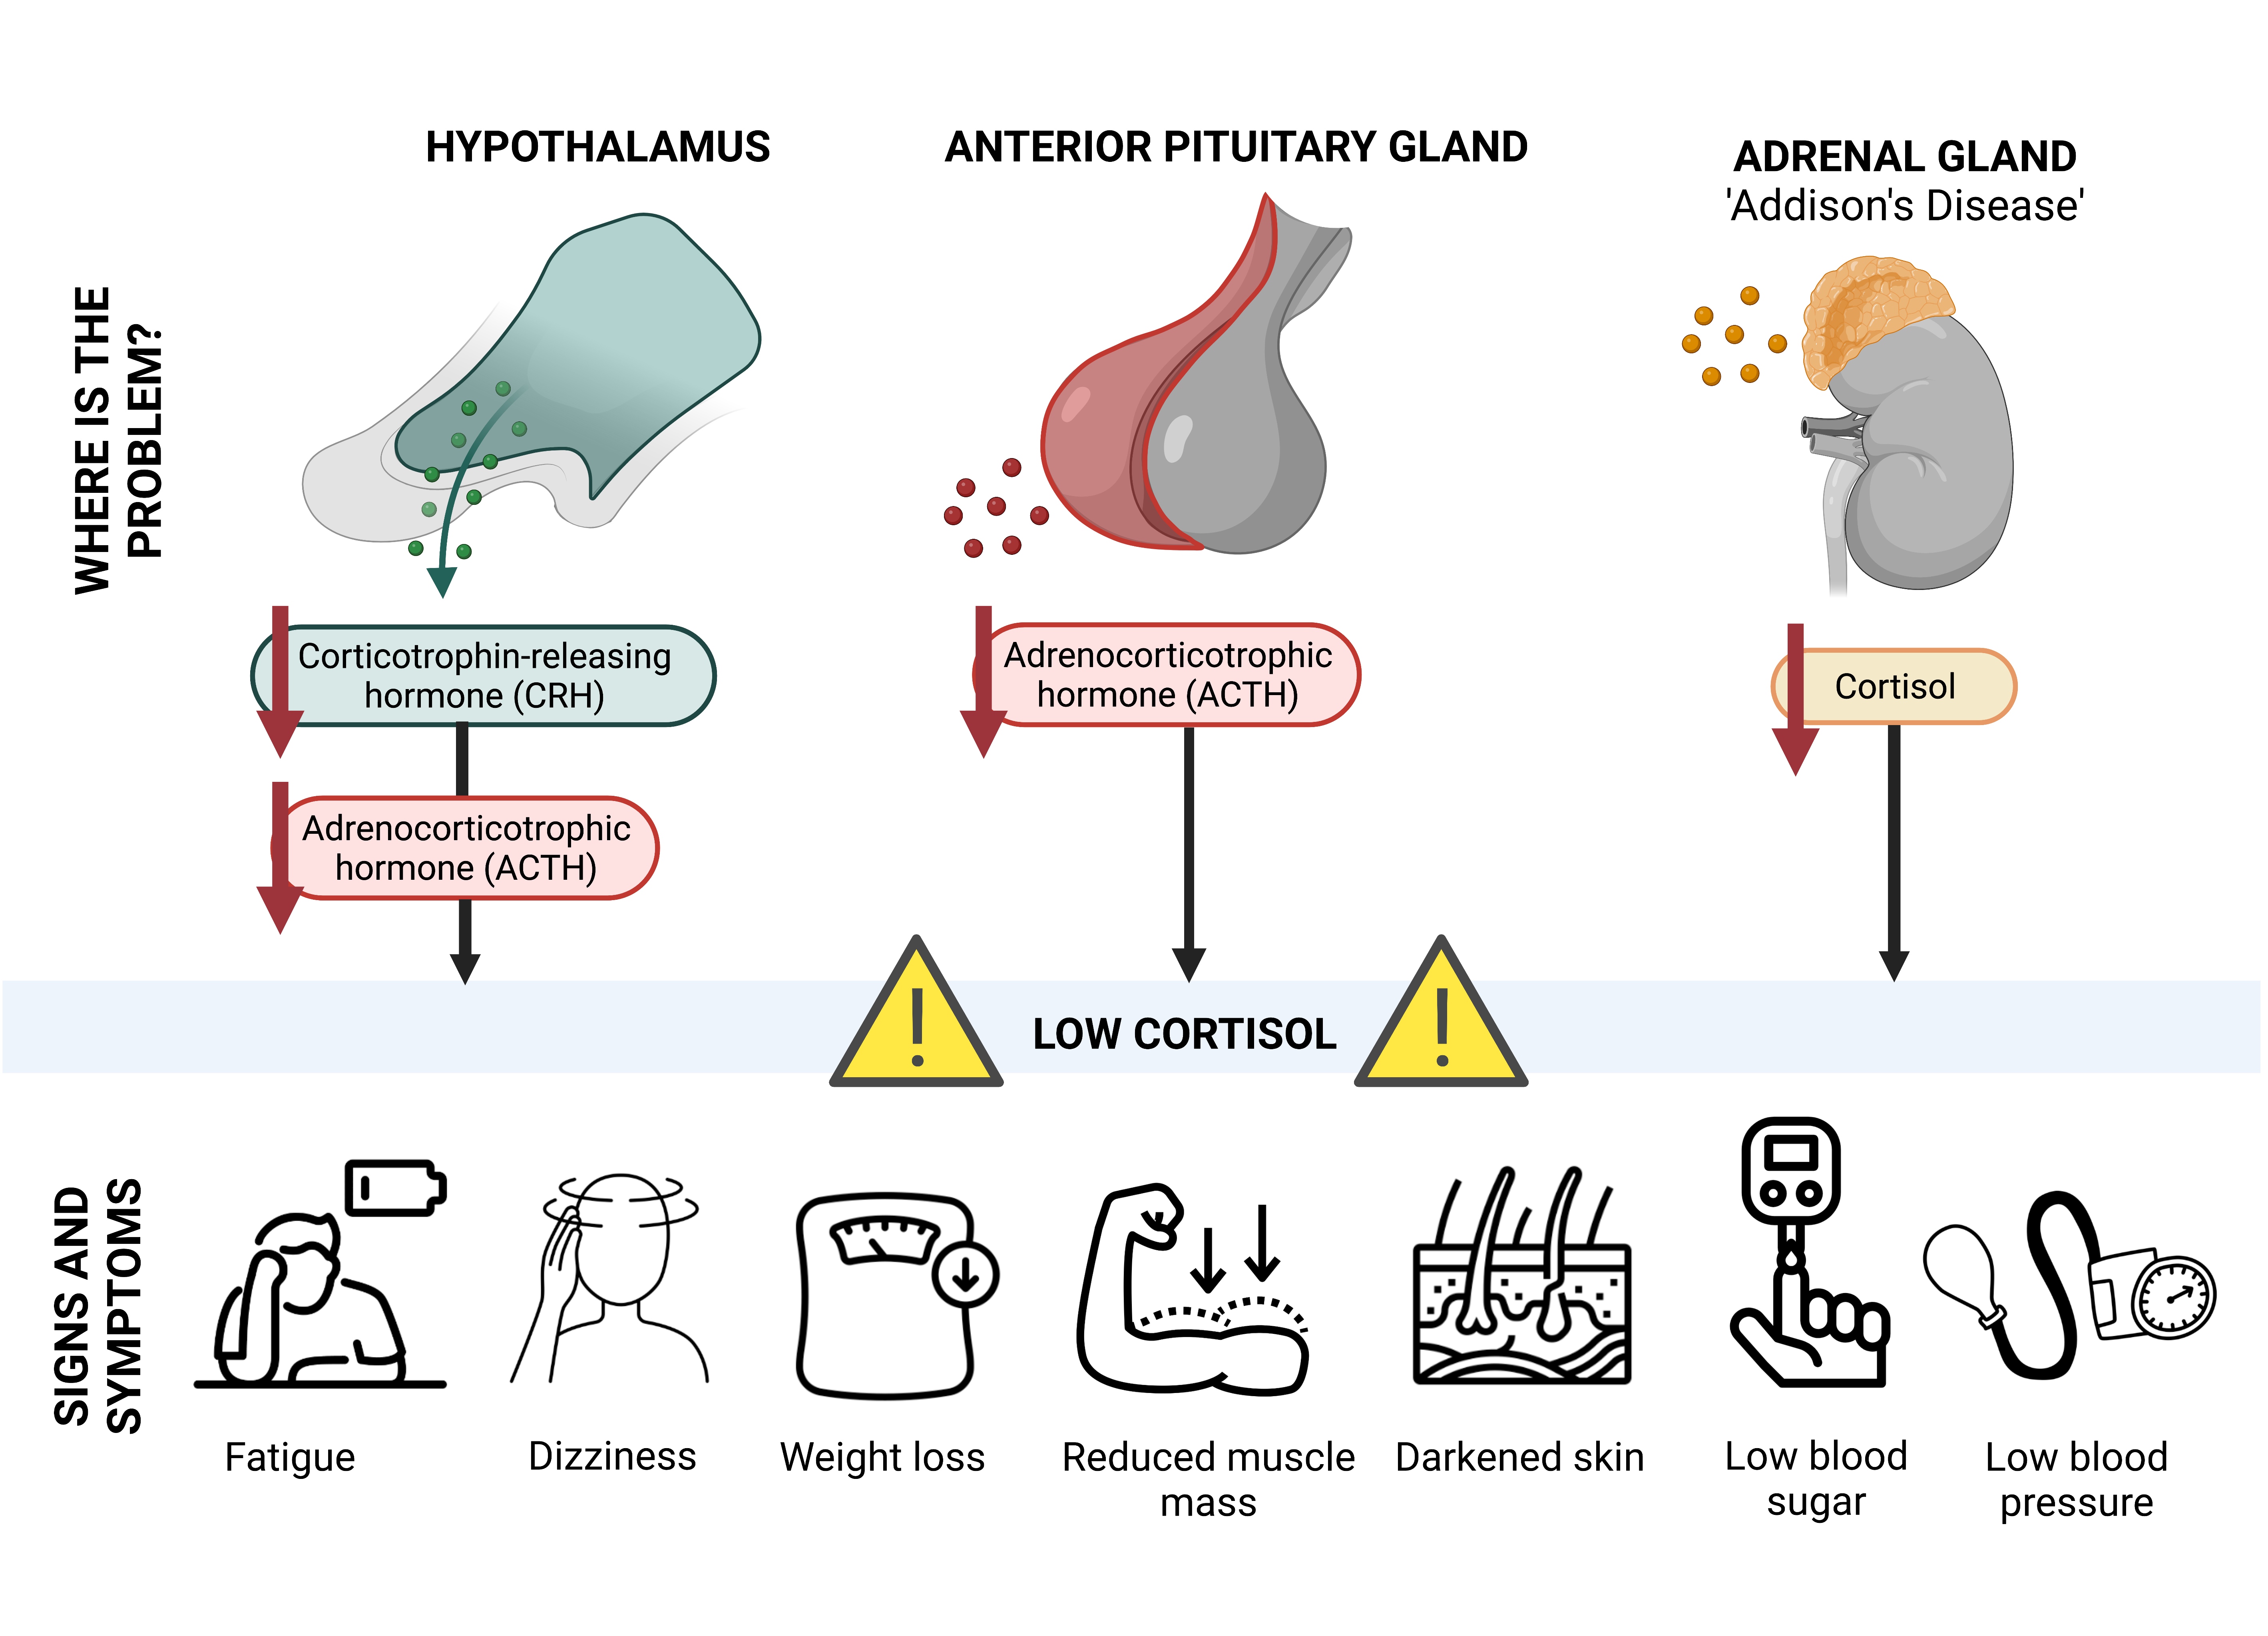 Too little cortisol may be due to a problem in the hypothalamus, anterior pituitary gland or the adrenal glands also known as Addison’s disease. Signs and symptoms of low cortisol may include fatigue, dizziness, weight loss, reduced muscle mass / muscle weakness, darkening of regions of the skin, low blood sugar and low blood pressure.